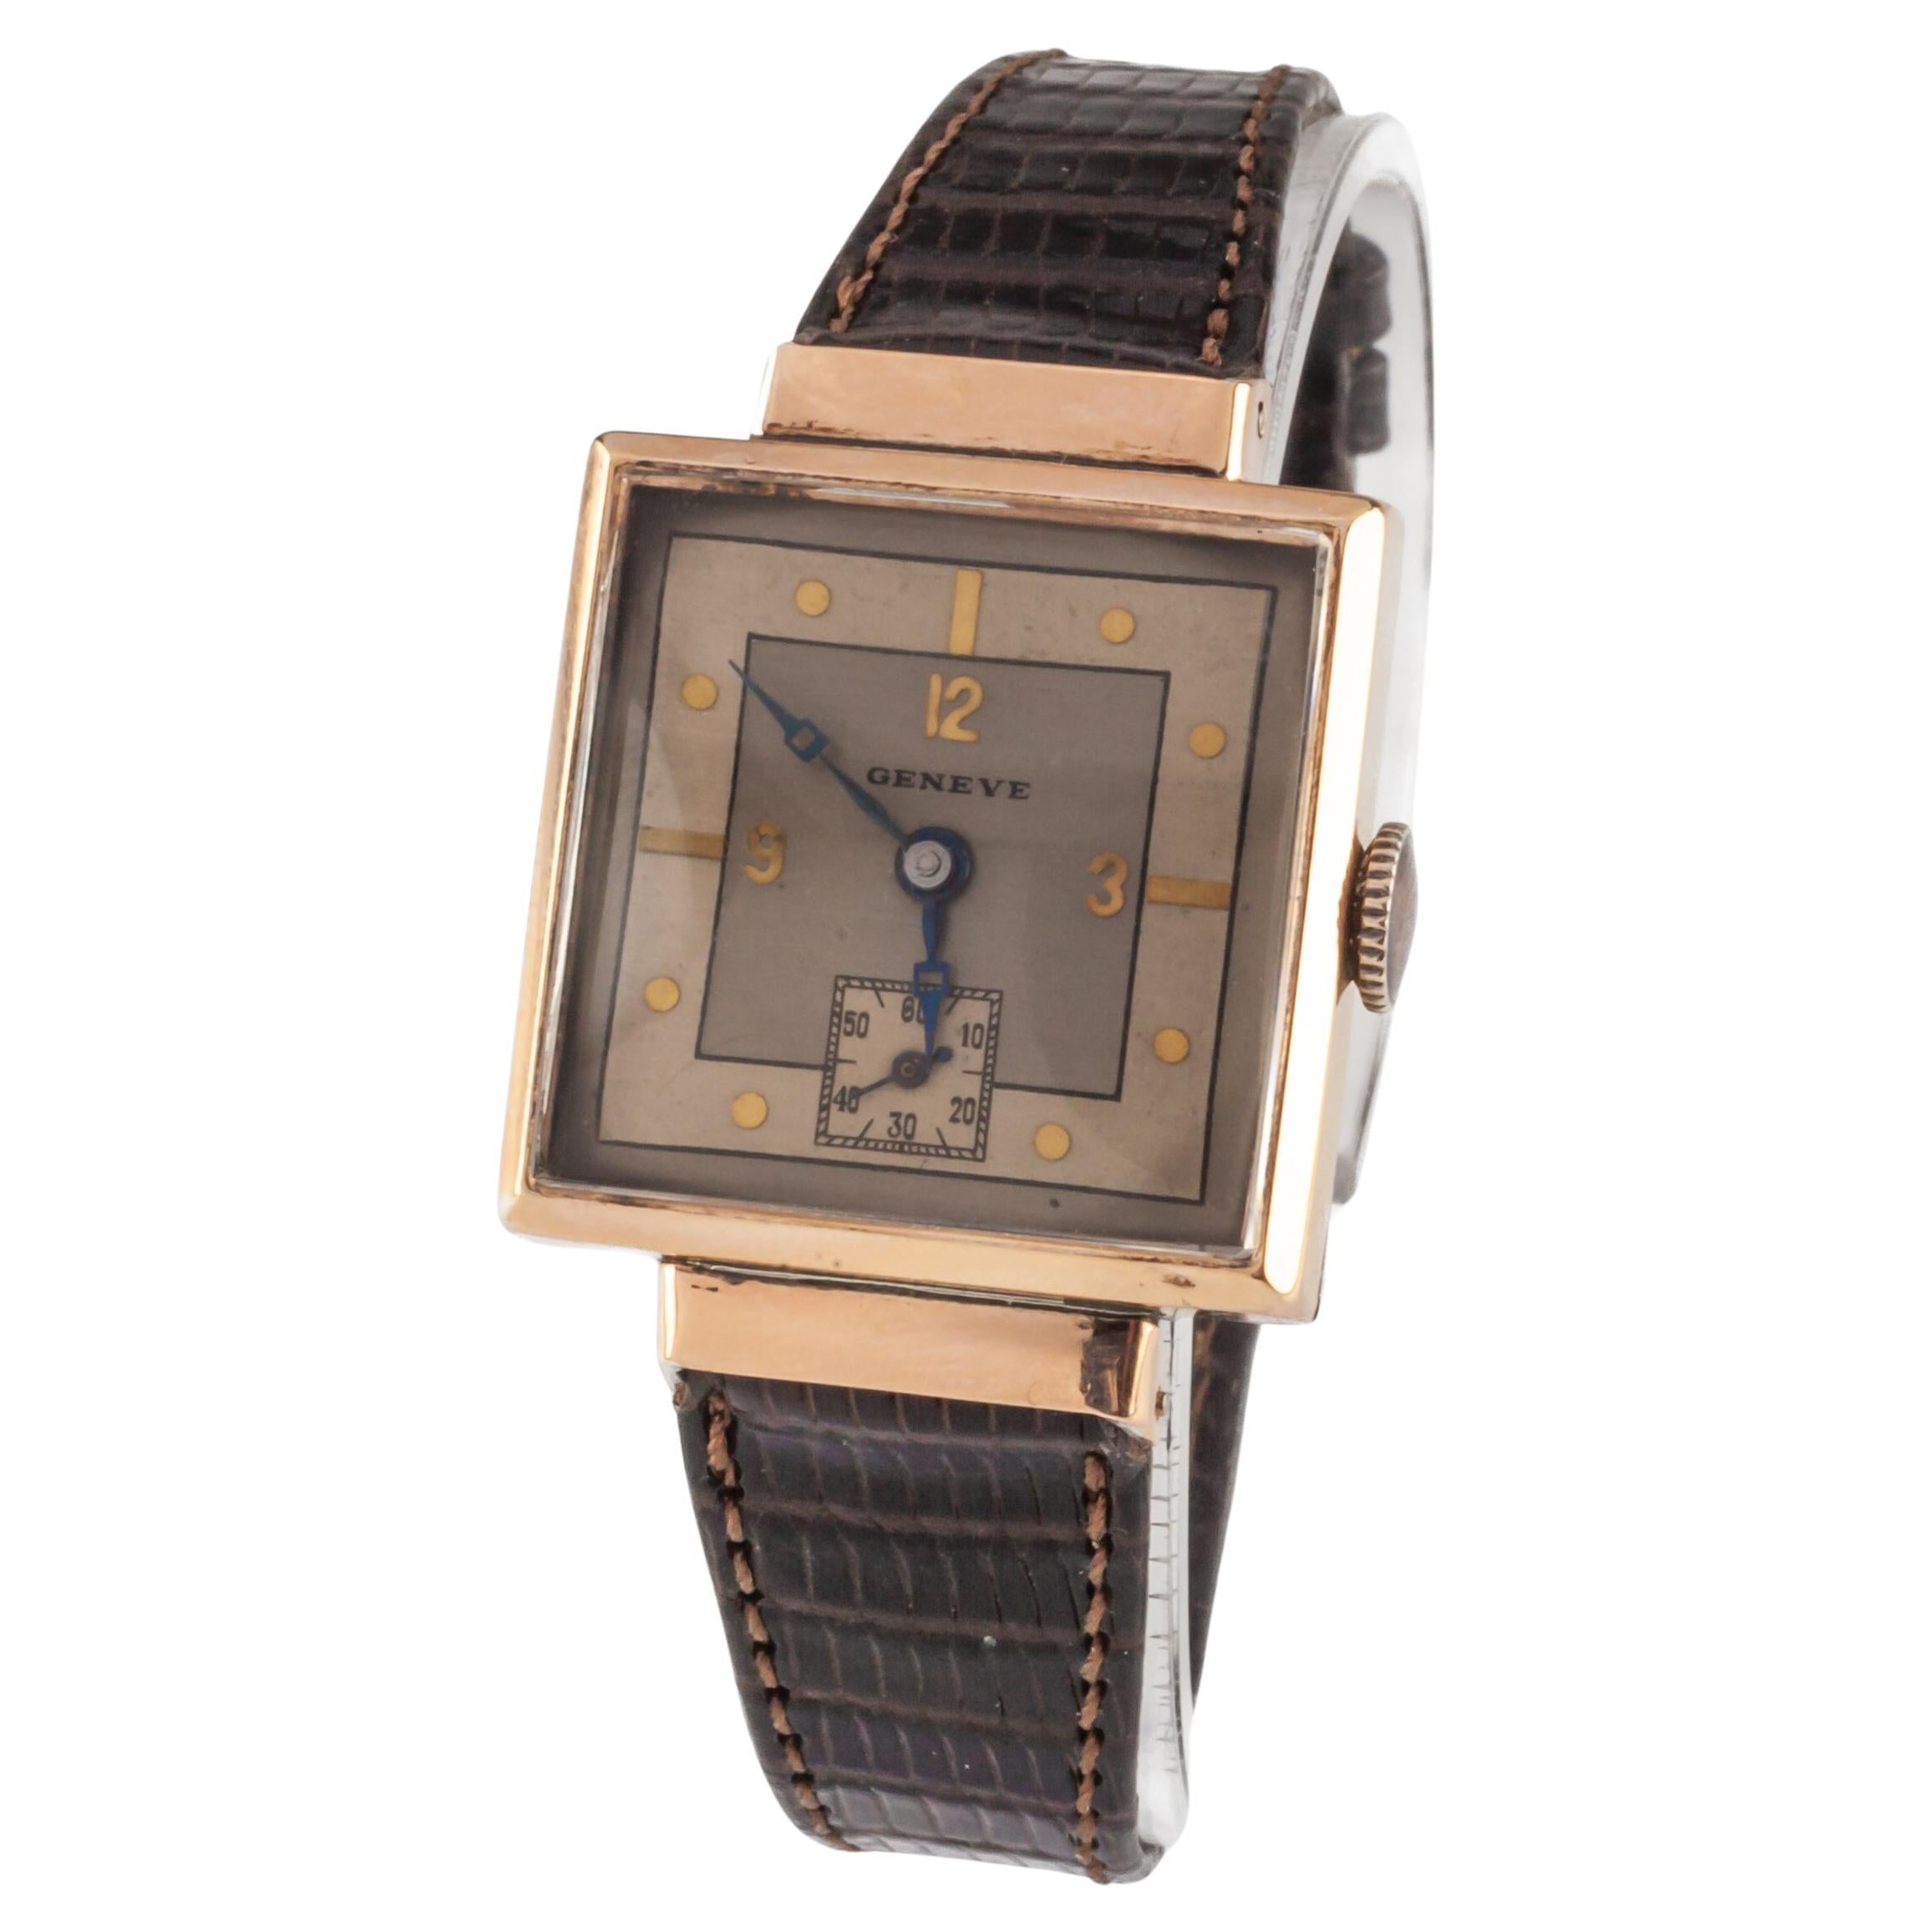 Geneve Men's Art Deco Rose Gold Filled Hand-Winding Watch w/ Leather Band